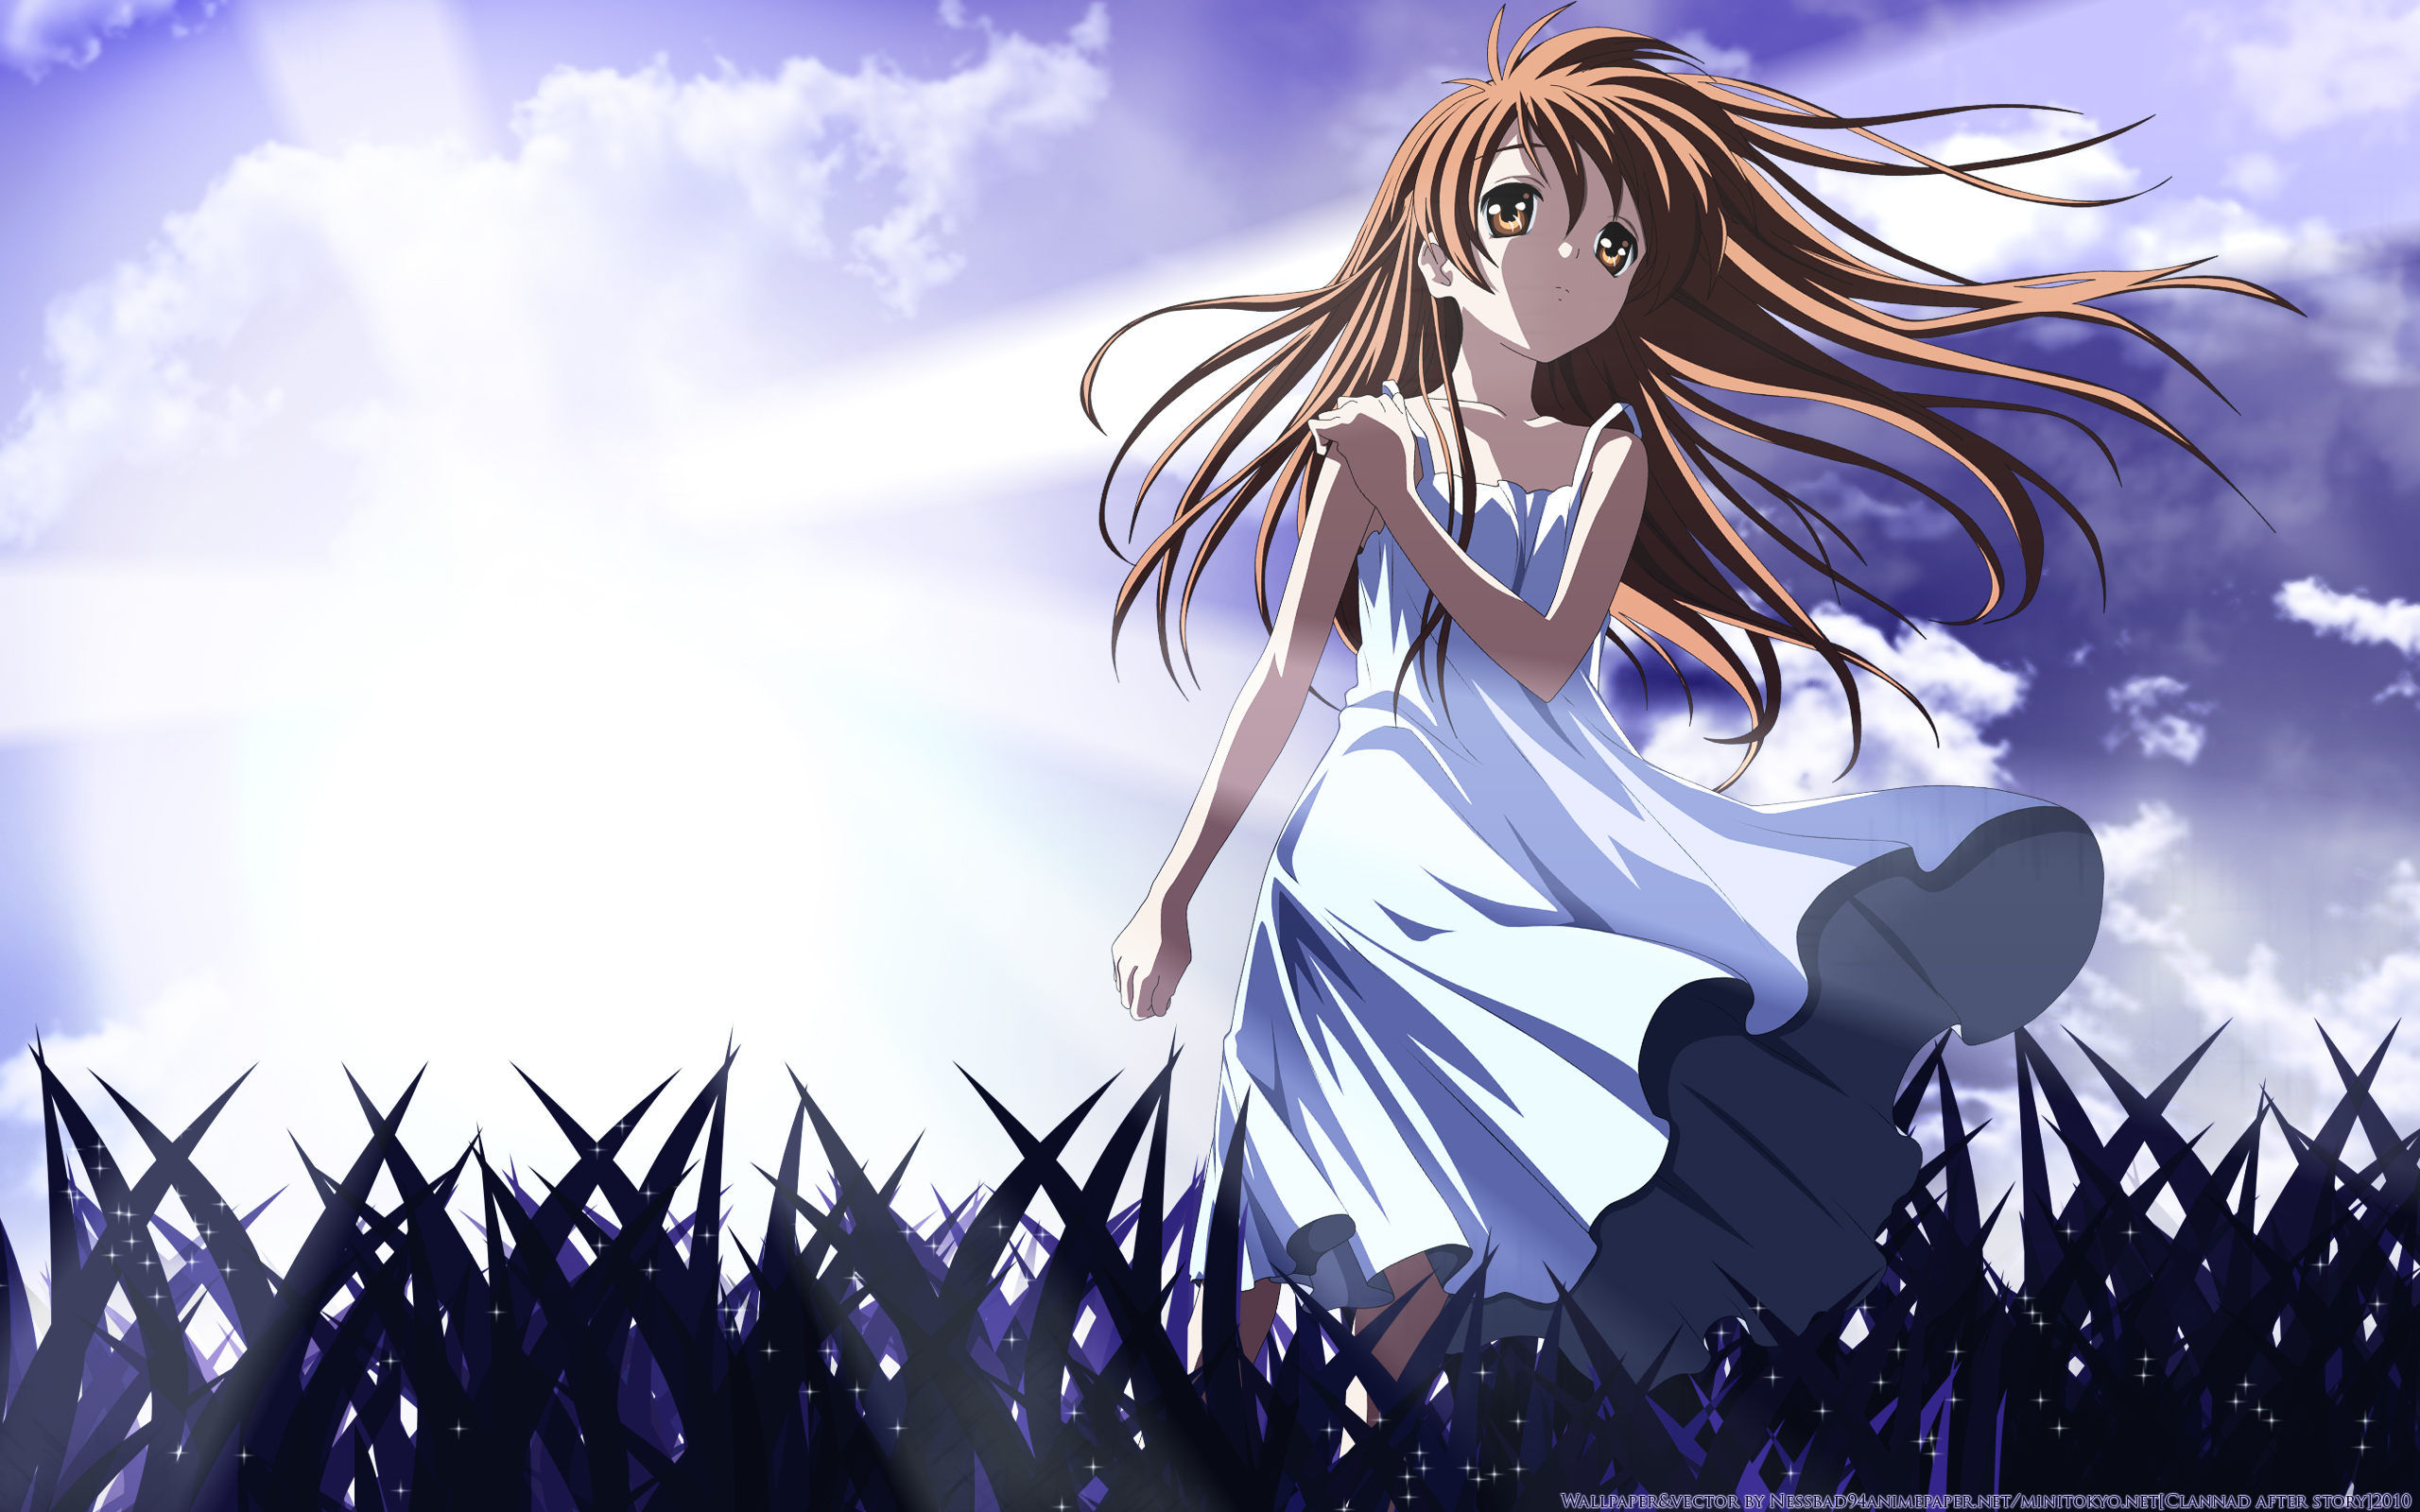 Free Download Clannad Wallpaper Anime Wallpaper 2560x1600 For Your Desktop Mobile Tablet Explore 76 Background Anime Manga Wallpaper Cool Anime Wallpaper Hd Anime Wallpapers 19x1080